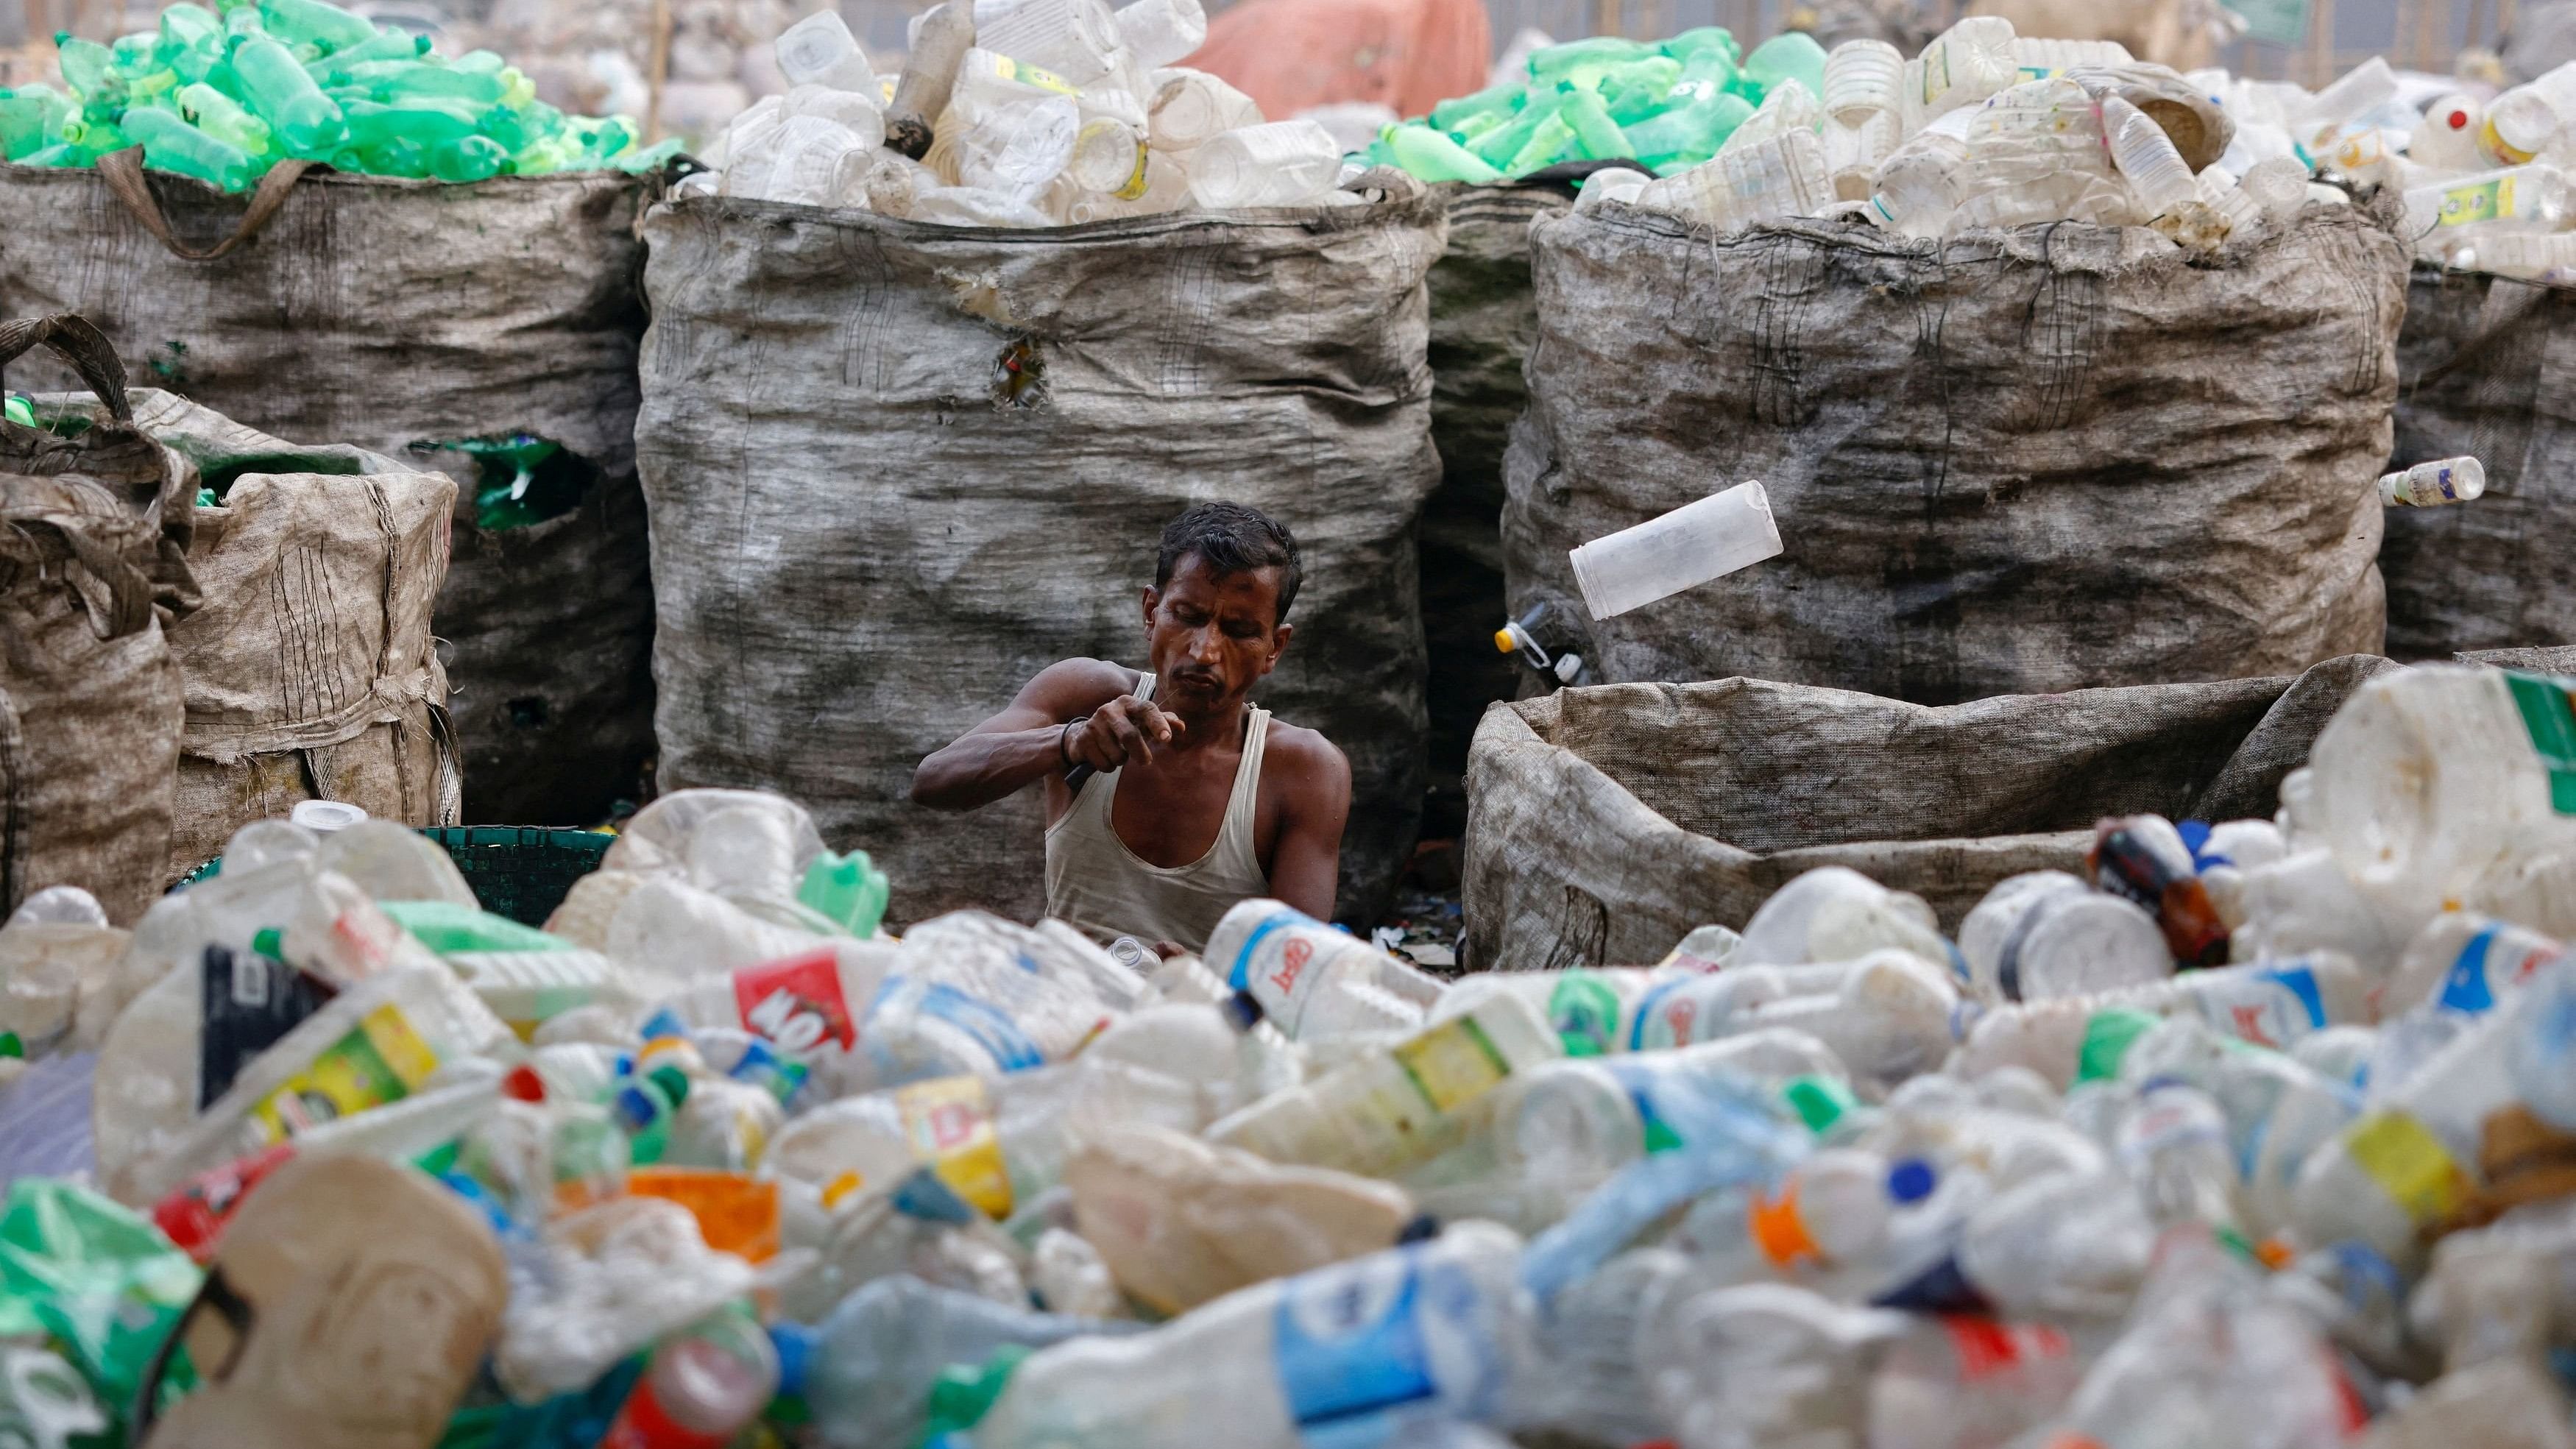 <div class="paragraphs"><p>File photo showing a man surrounded by heaps of plastic waste.</p></div>